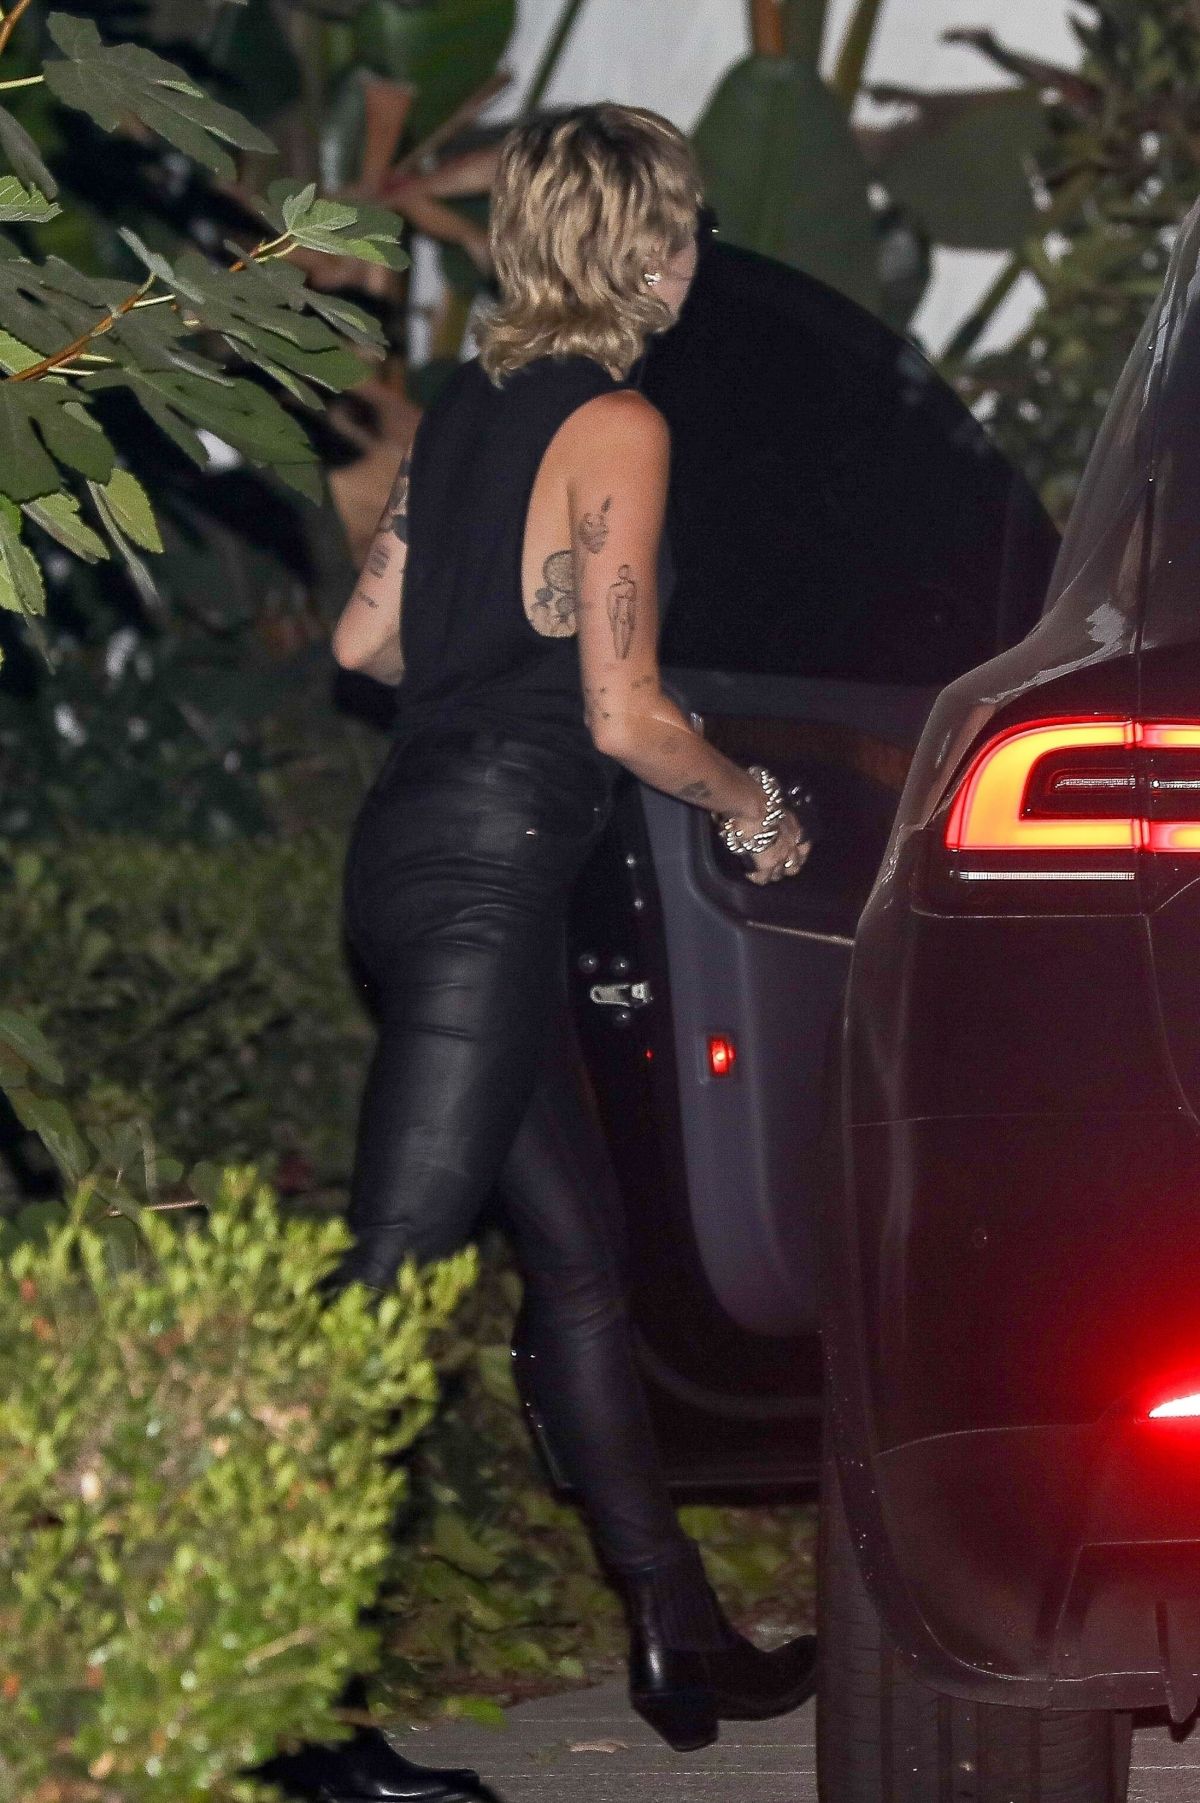 miley-cyrus-leaves-a-photoshoot-in-beverly-hills-09-15-2020-4.jpg